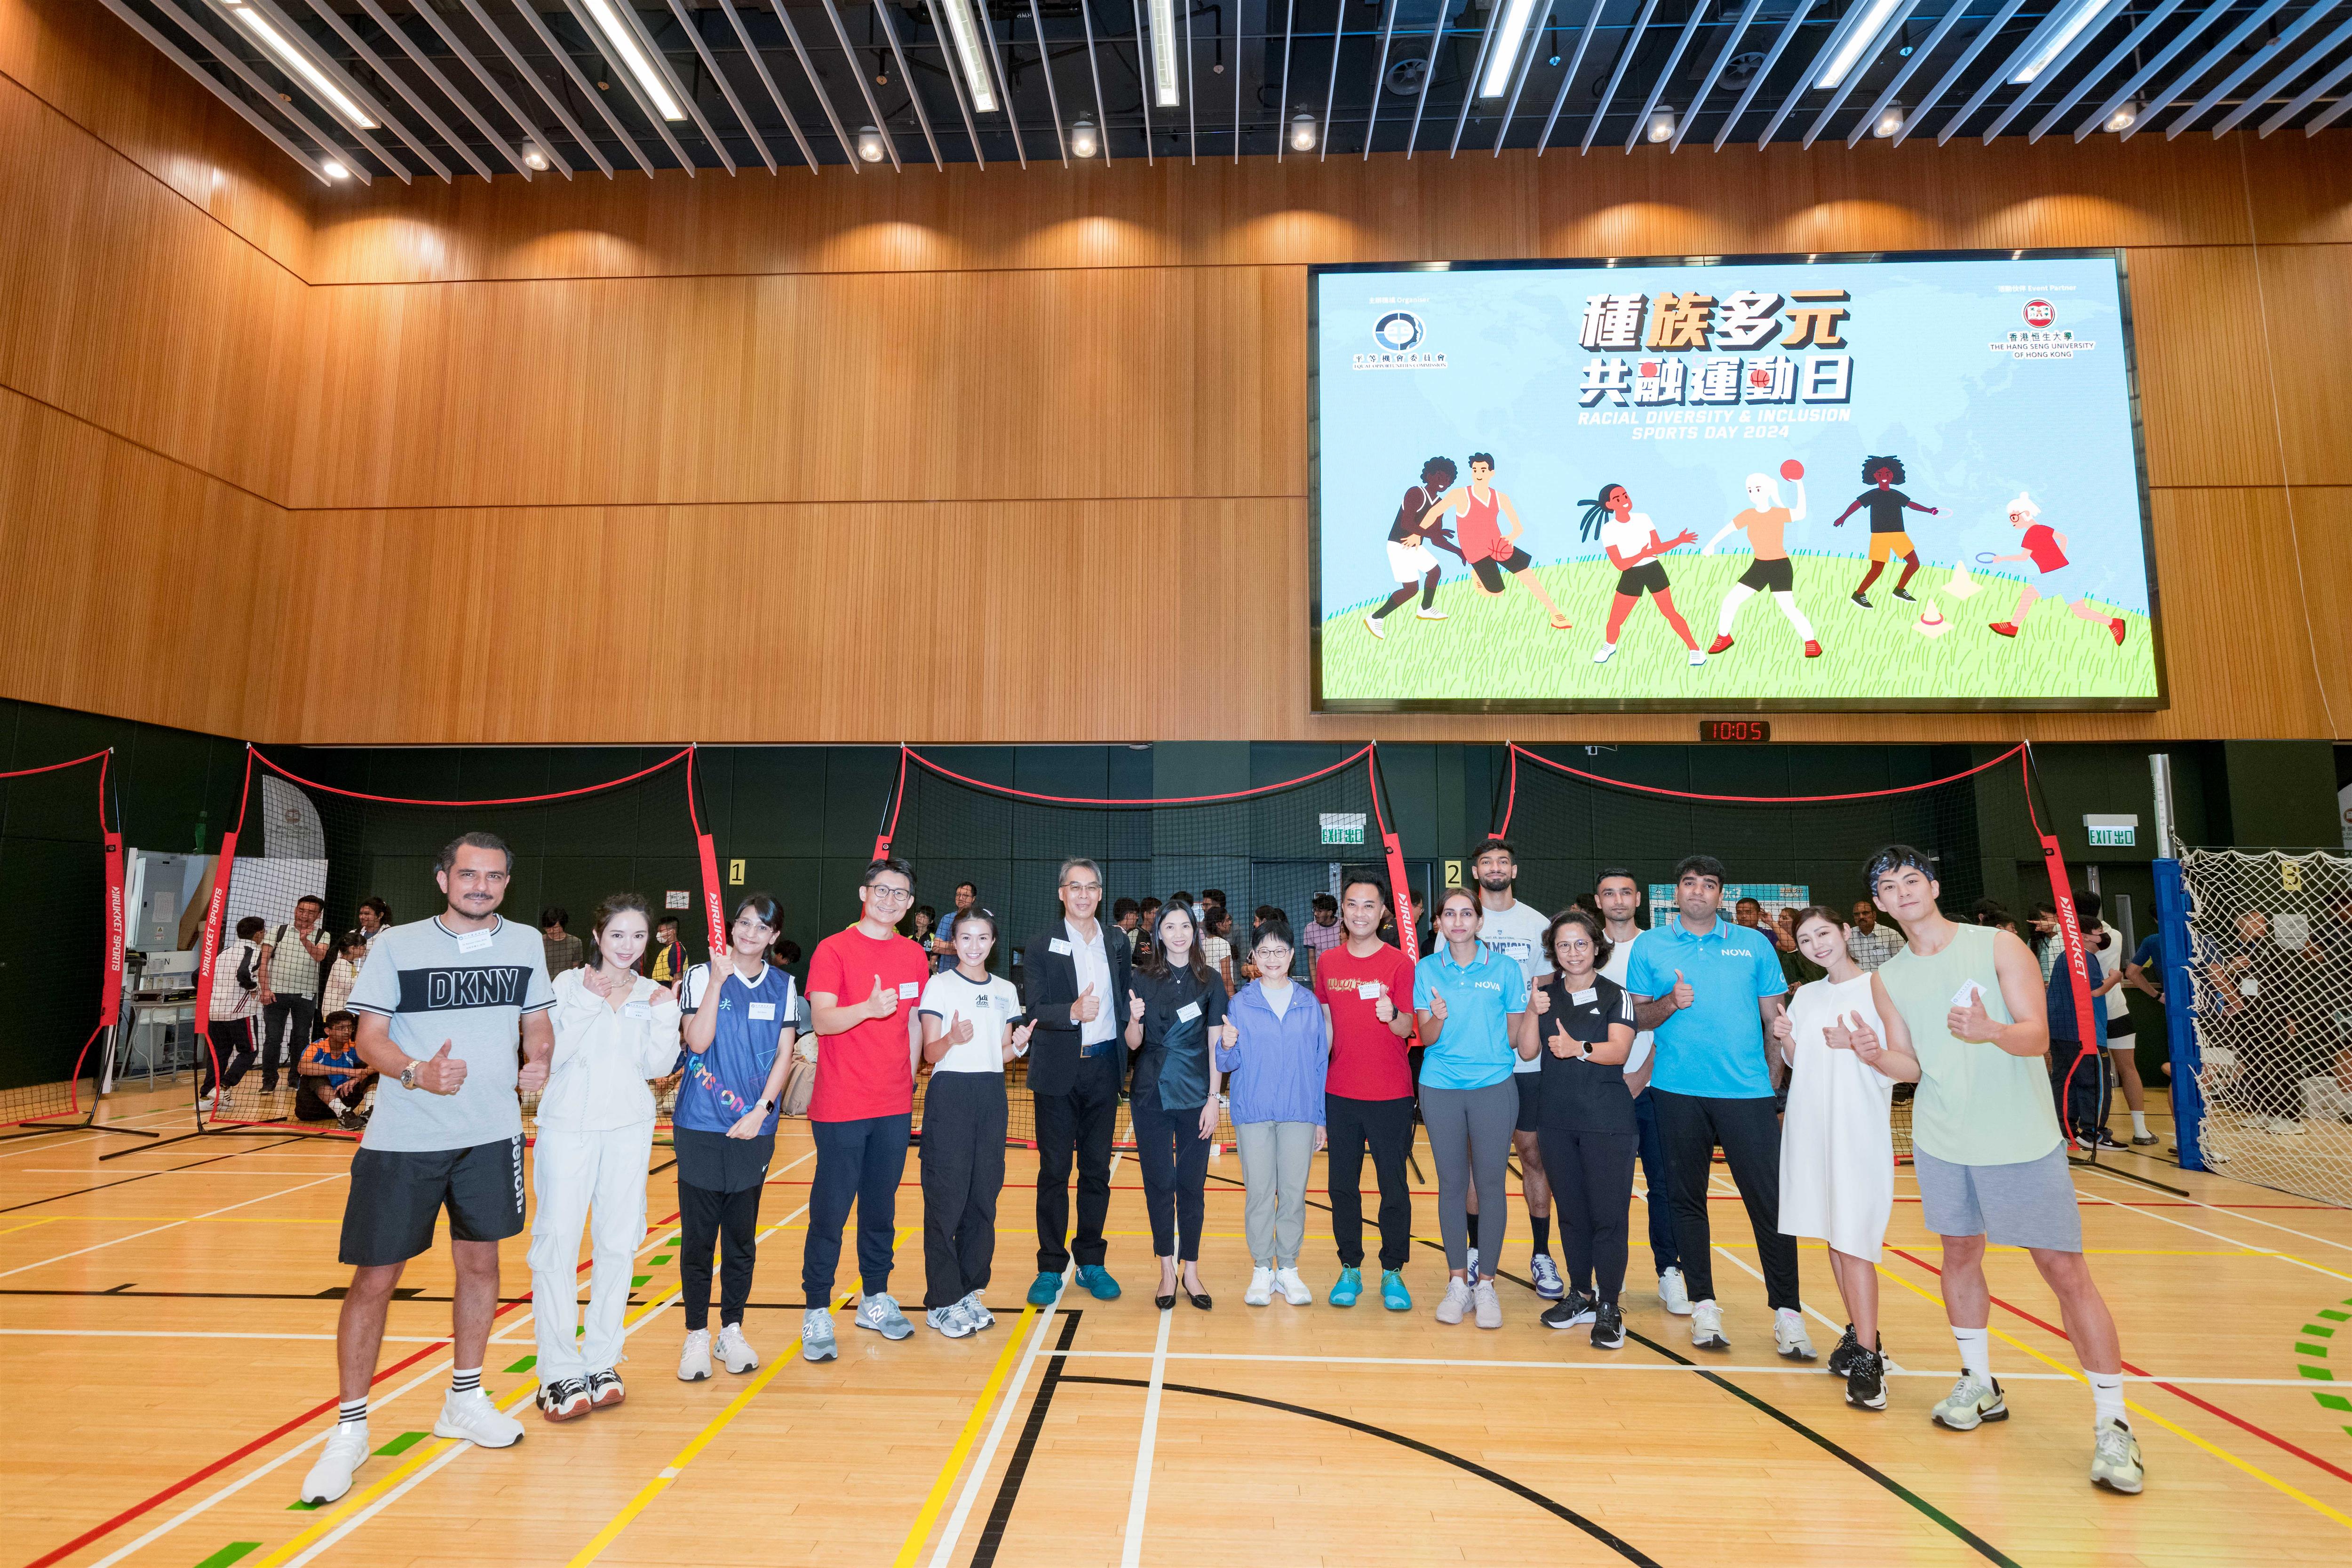 Ms Linda Lam Mei-sau, SBS, Chairperson of the EOC (eighth from left), Professor Fu Ho Ying, Jeanne, Vice President of The Hang Seng University of Hong Kong (Learning and Student Experience) (seventh from left) in a group photo with invitational tournament guests.